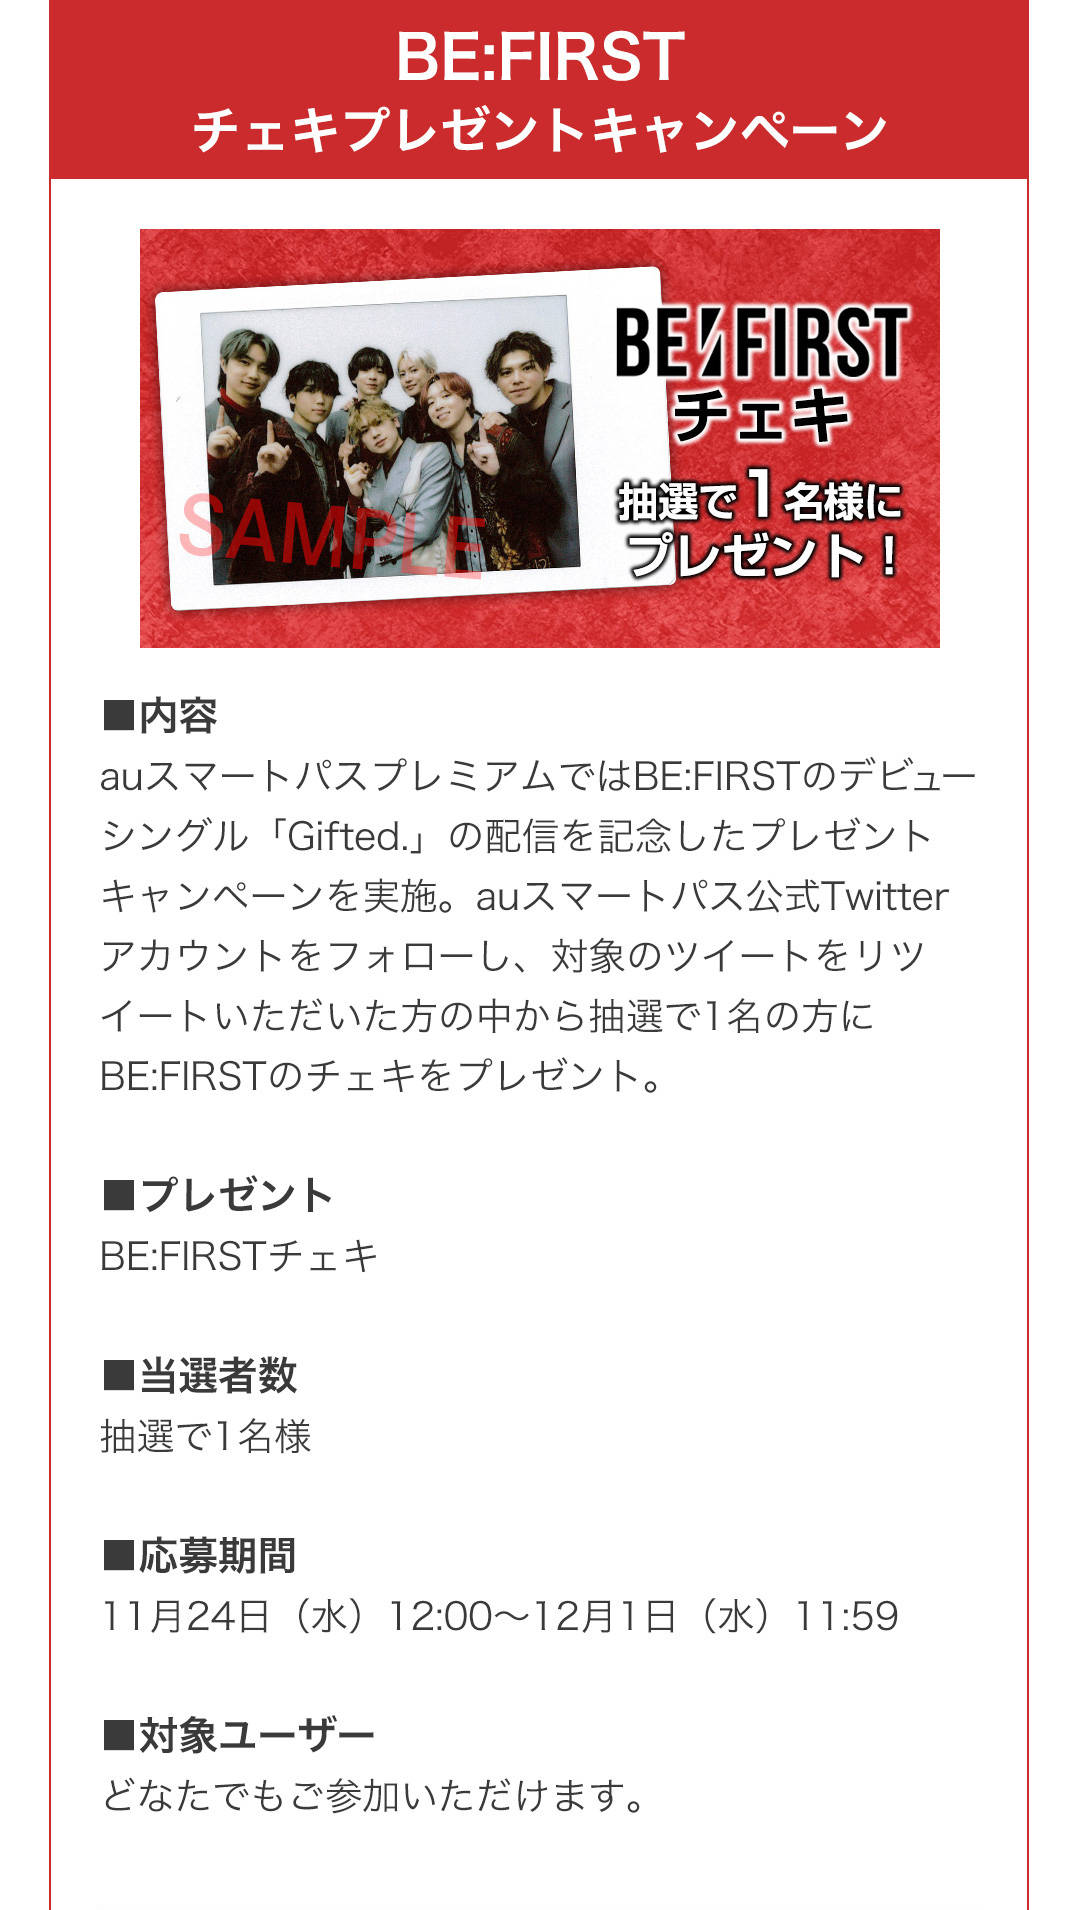 BE:FIRST チェキプレゼントキャンペーン